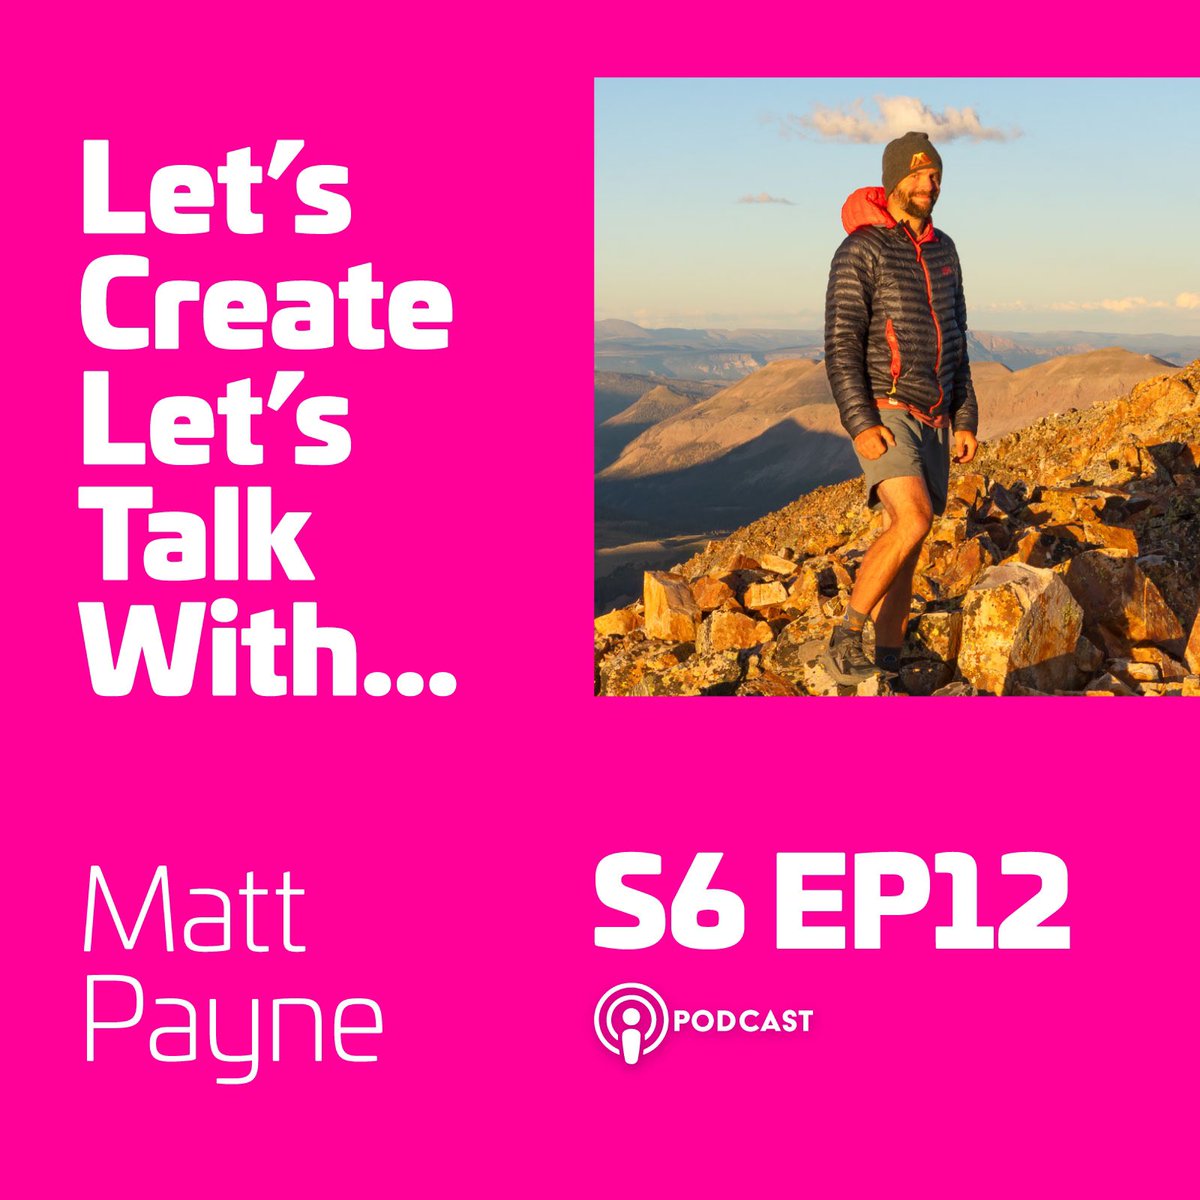 Lend me your ears! Listen to my next podcast episode on your fav podcast player or direct from my website 👇👇👇 maliphotography.co.uk/podcast/ #podcast #letstalk #mattpayne @MattPaynePhoto